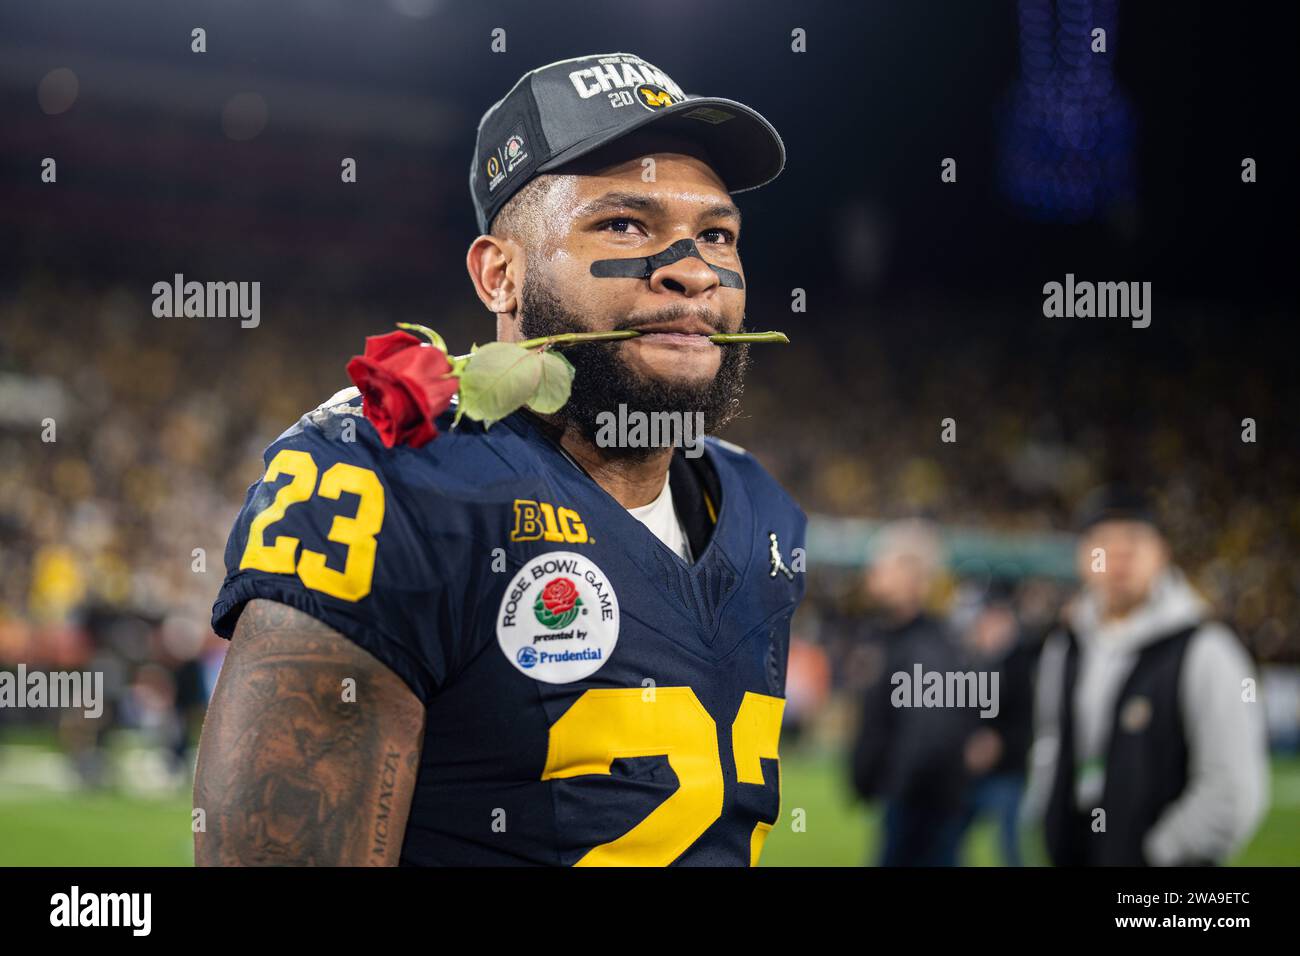 Michigan Wolverines linebacker Michael Barrett (23) celebrates a victory after the CFP Semifinal at the Rose Bowl Game against the Alabama Crimson Tid Stock Photo